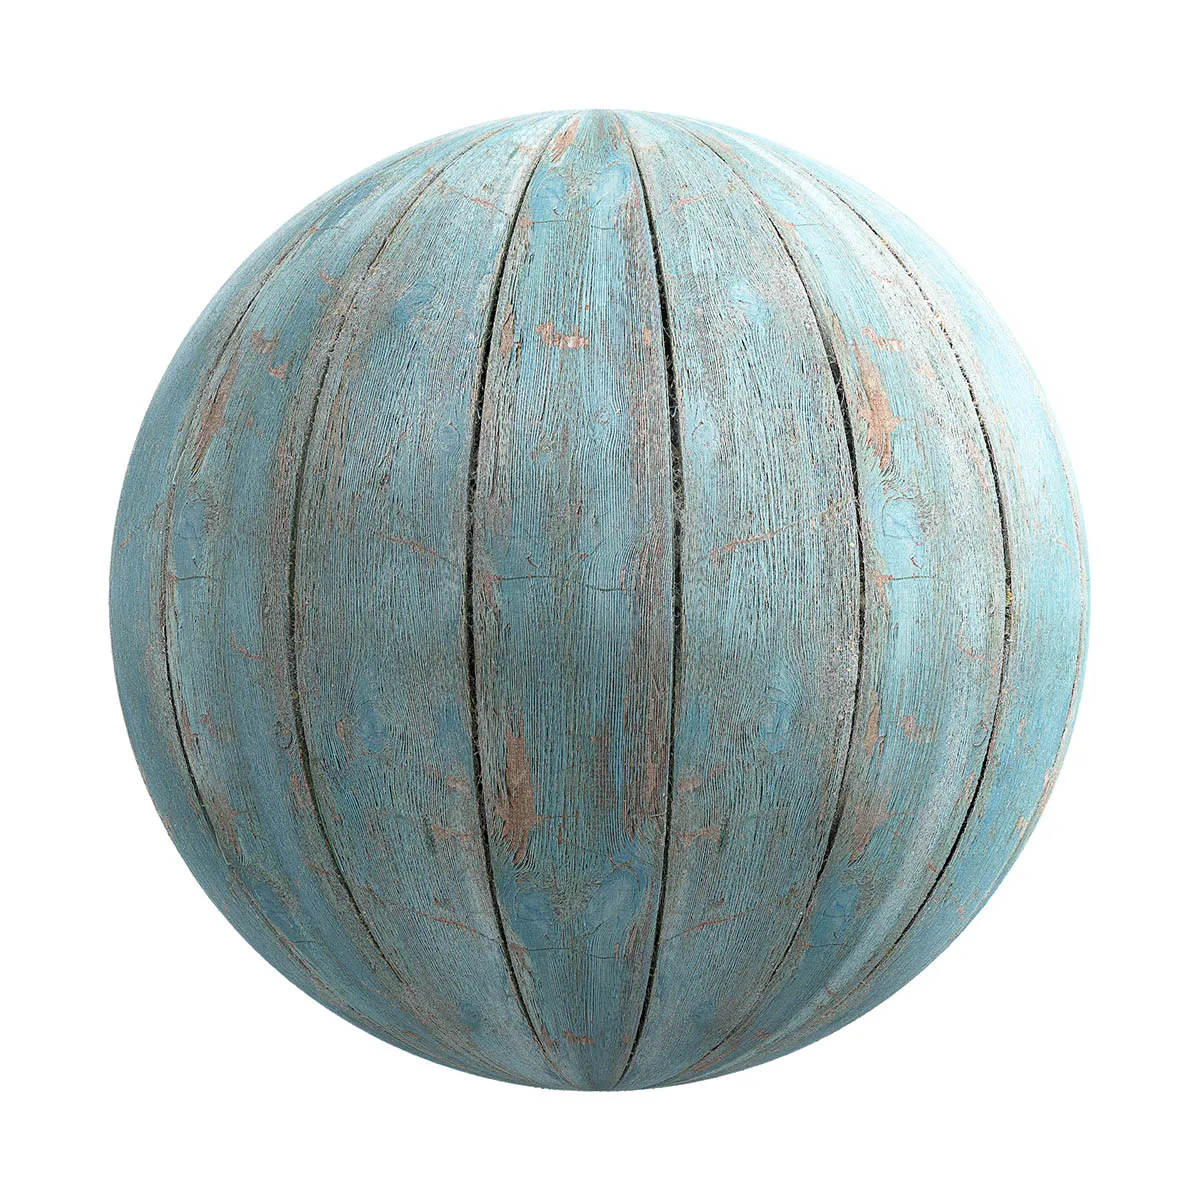 CGAxis PRB 18 – Blue Painted Wooden Planks Pbr 55 – 4K – 8K